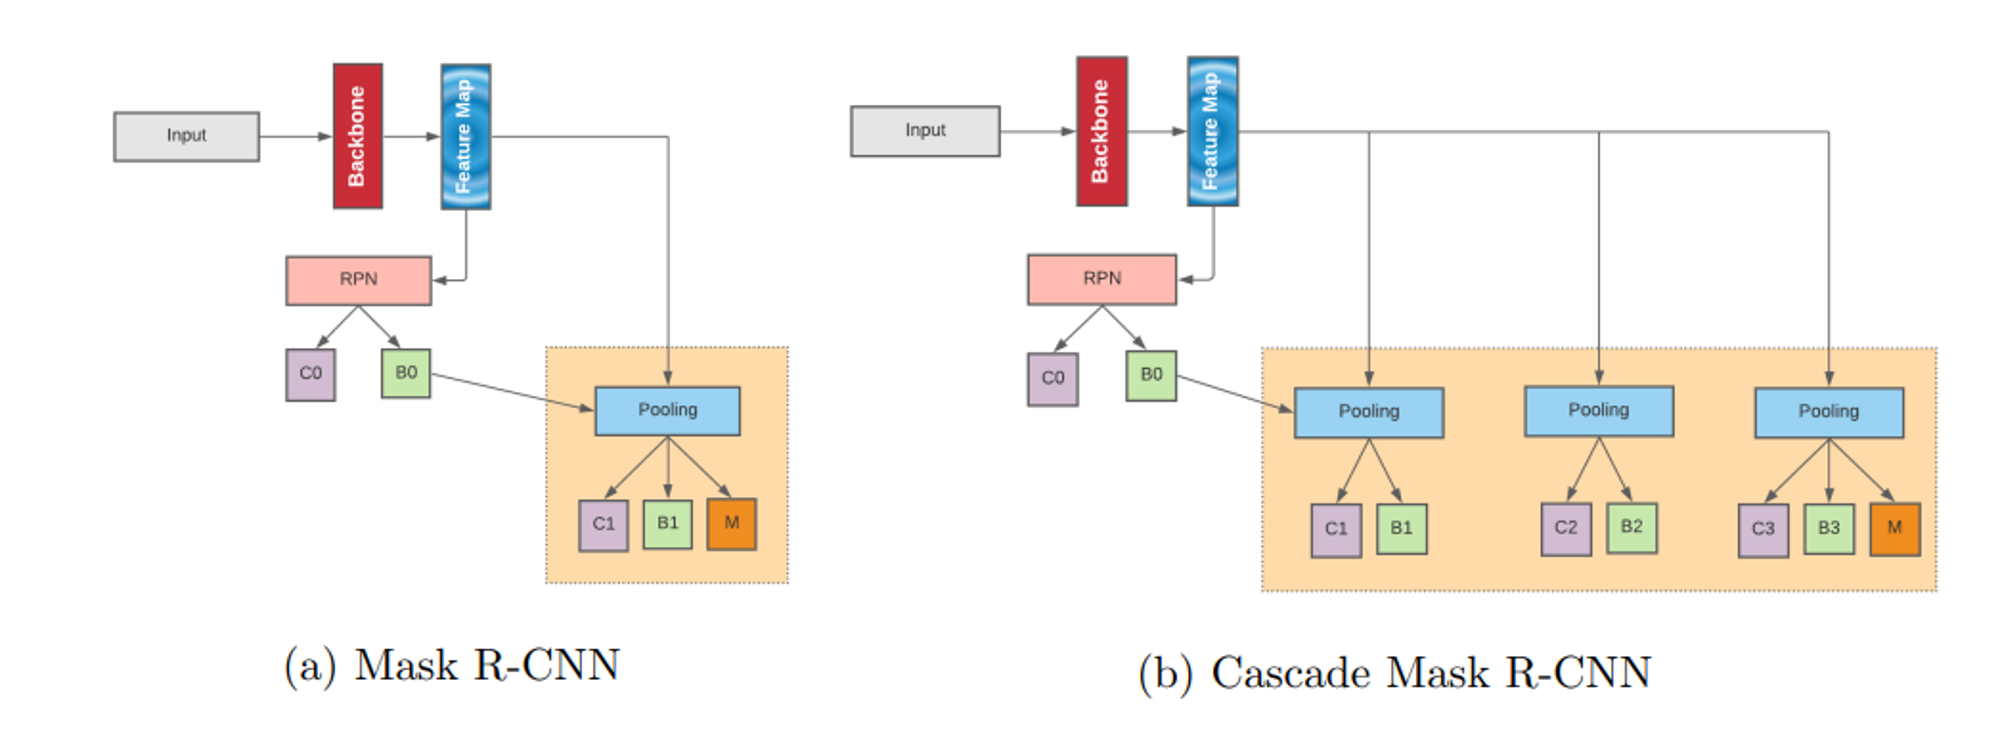  The architecture of Mask R-CNN (a) and Cascade Mask R-CNN (b). C, B and M denote class label, bounding box and mask predictions of the corresponding stage, respectively. Proposal head outputs are denoted with zero indexes.